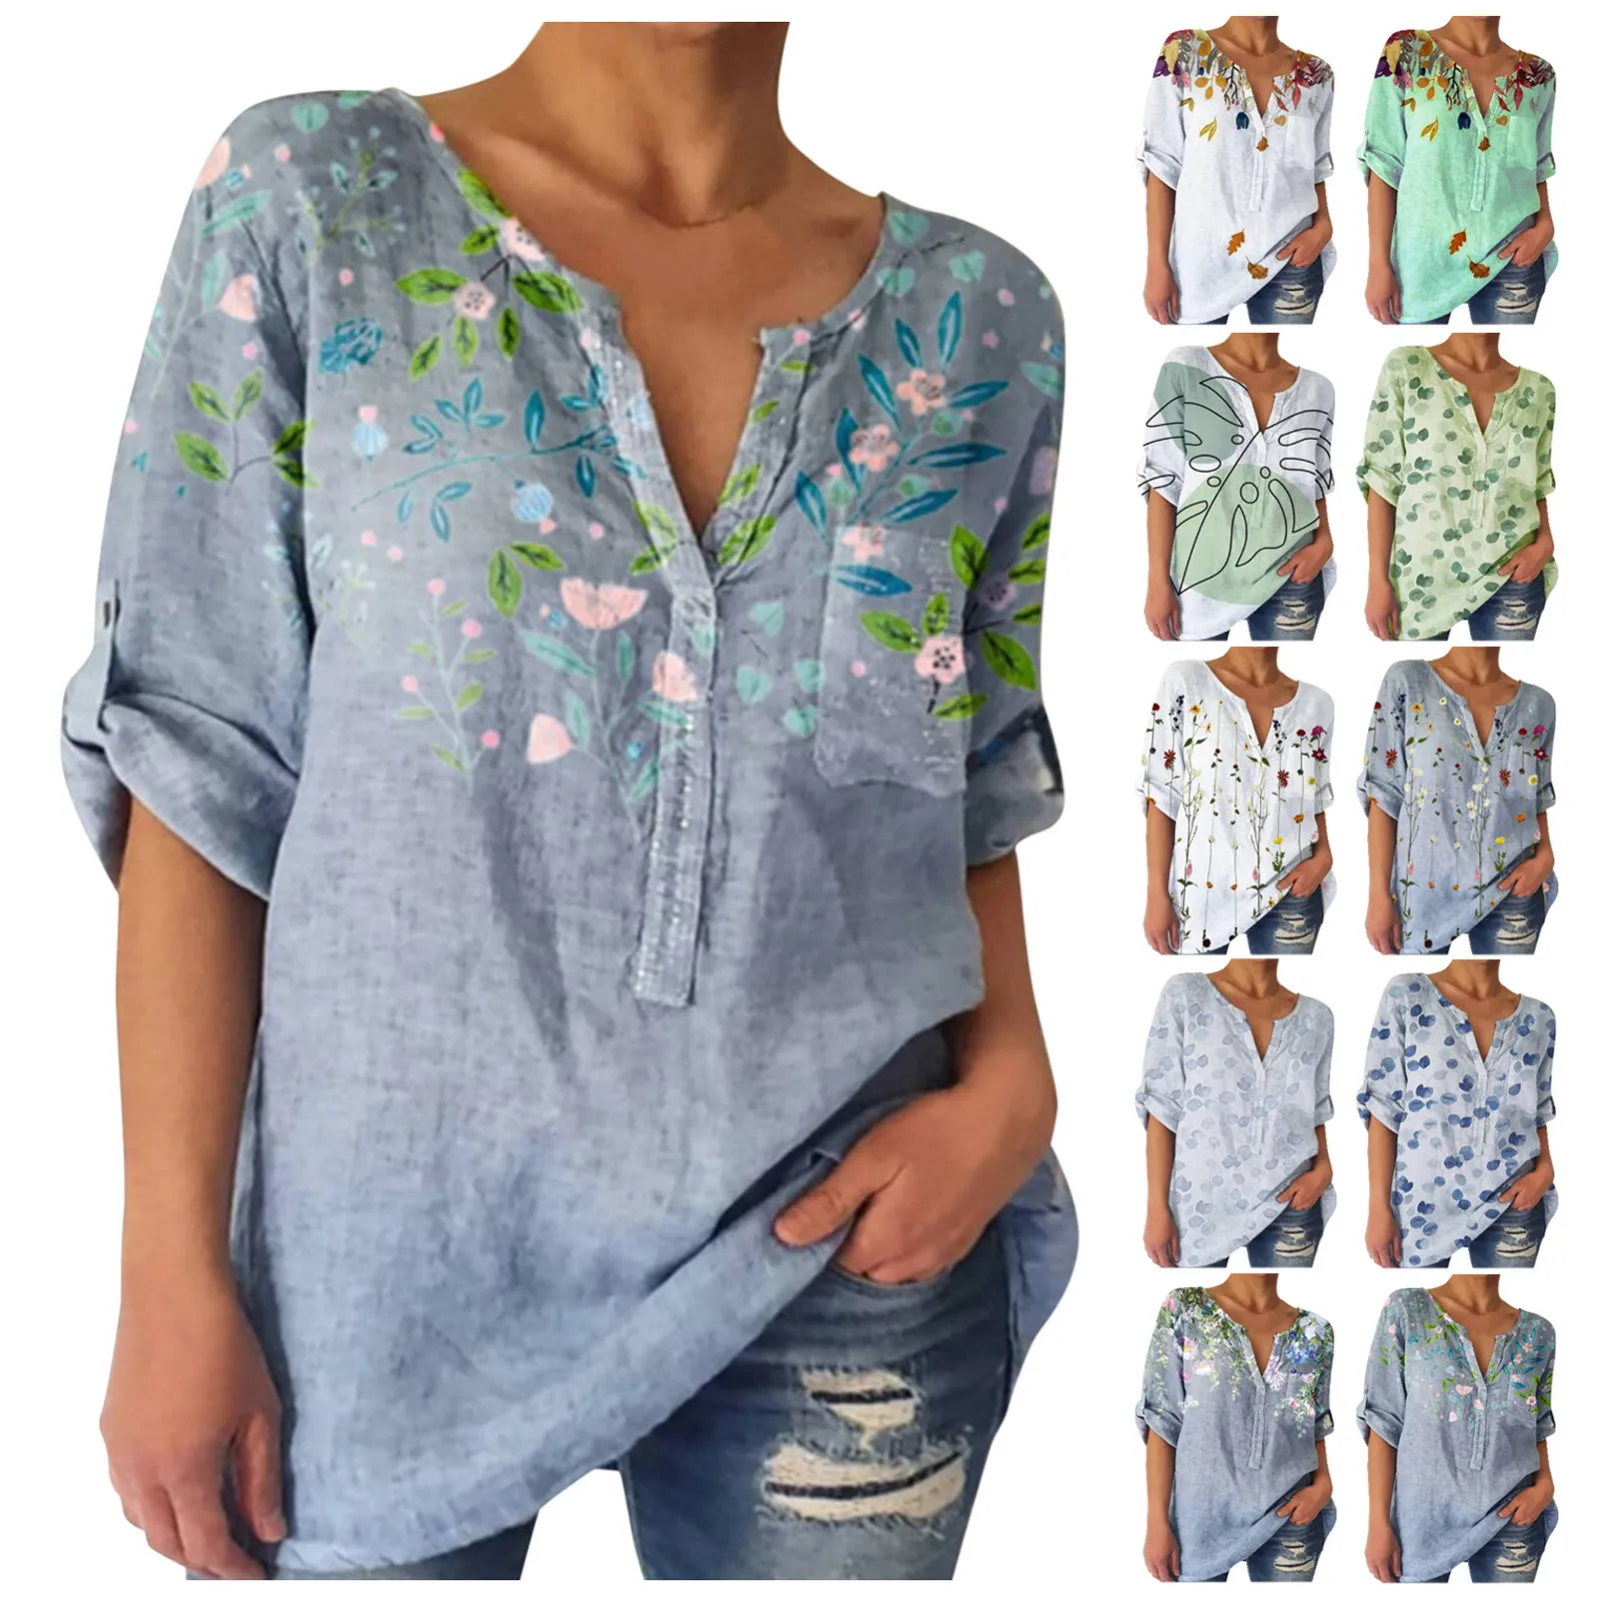 

Street Style Lady Casual Tops Summer Loose Elegant Pullover Shirts For Women V-neck Print Short-sleeved Vintage Blouse Blusas R5